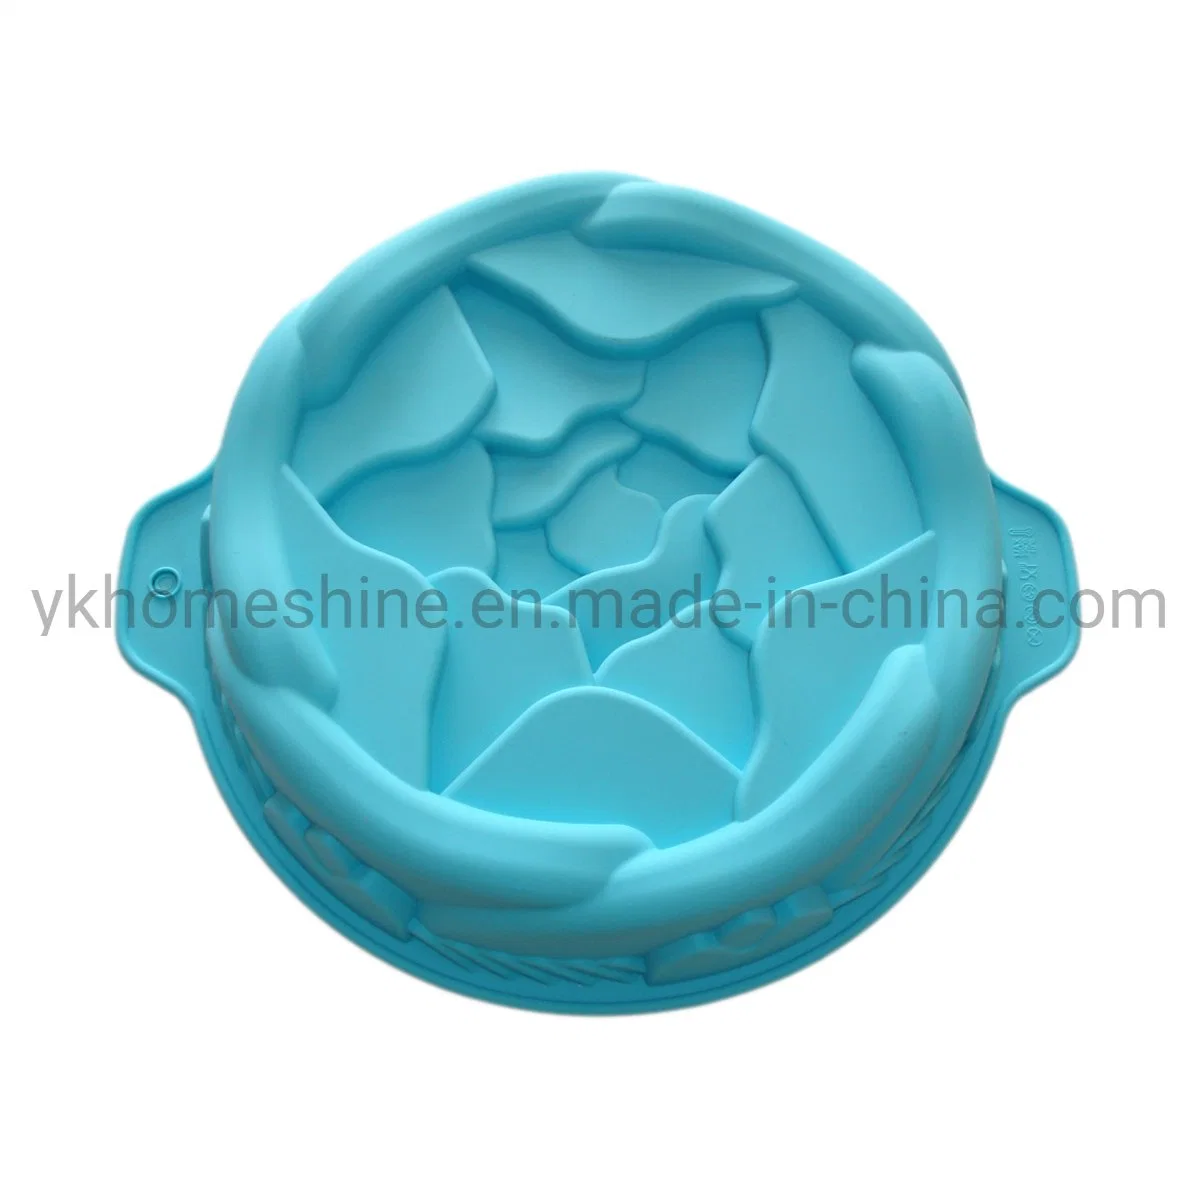 Heat Resistant Non-Stick Bakeware Custom Silicone Bake Mould